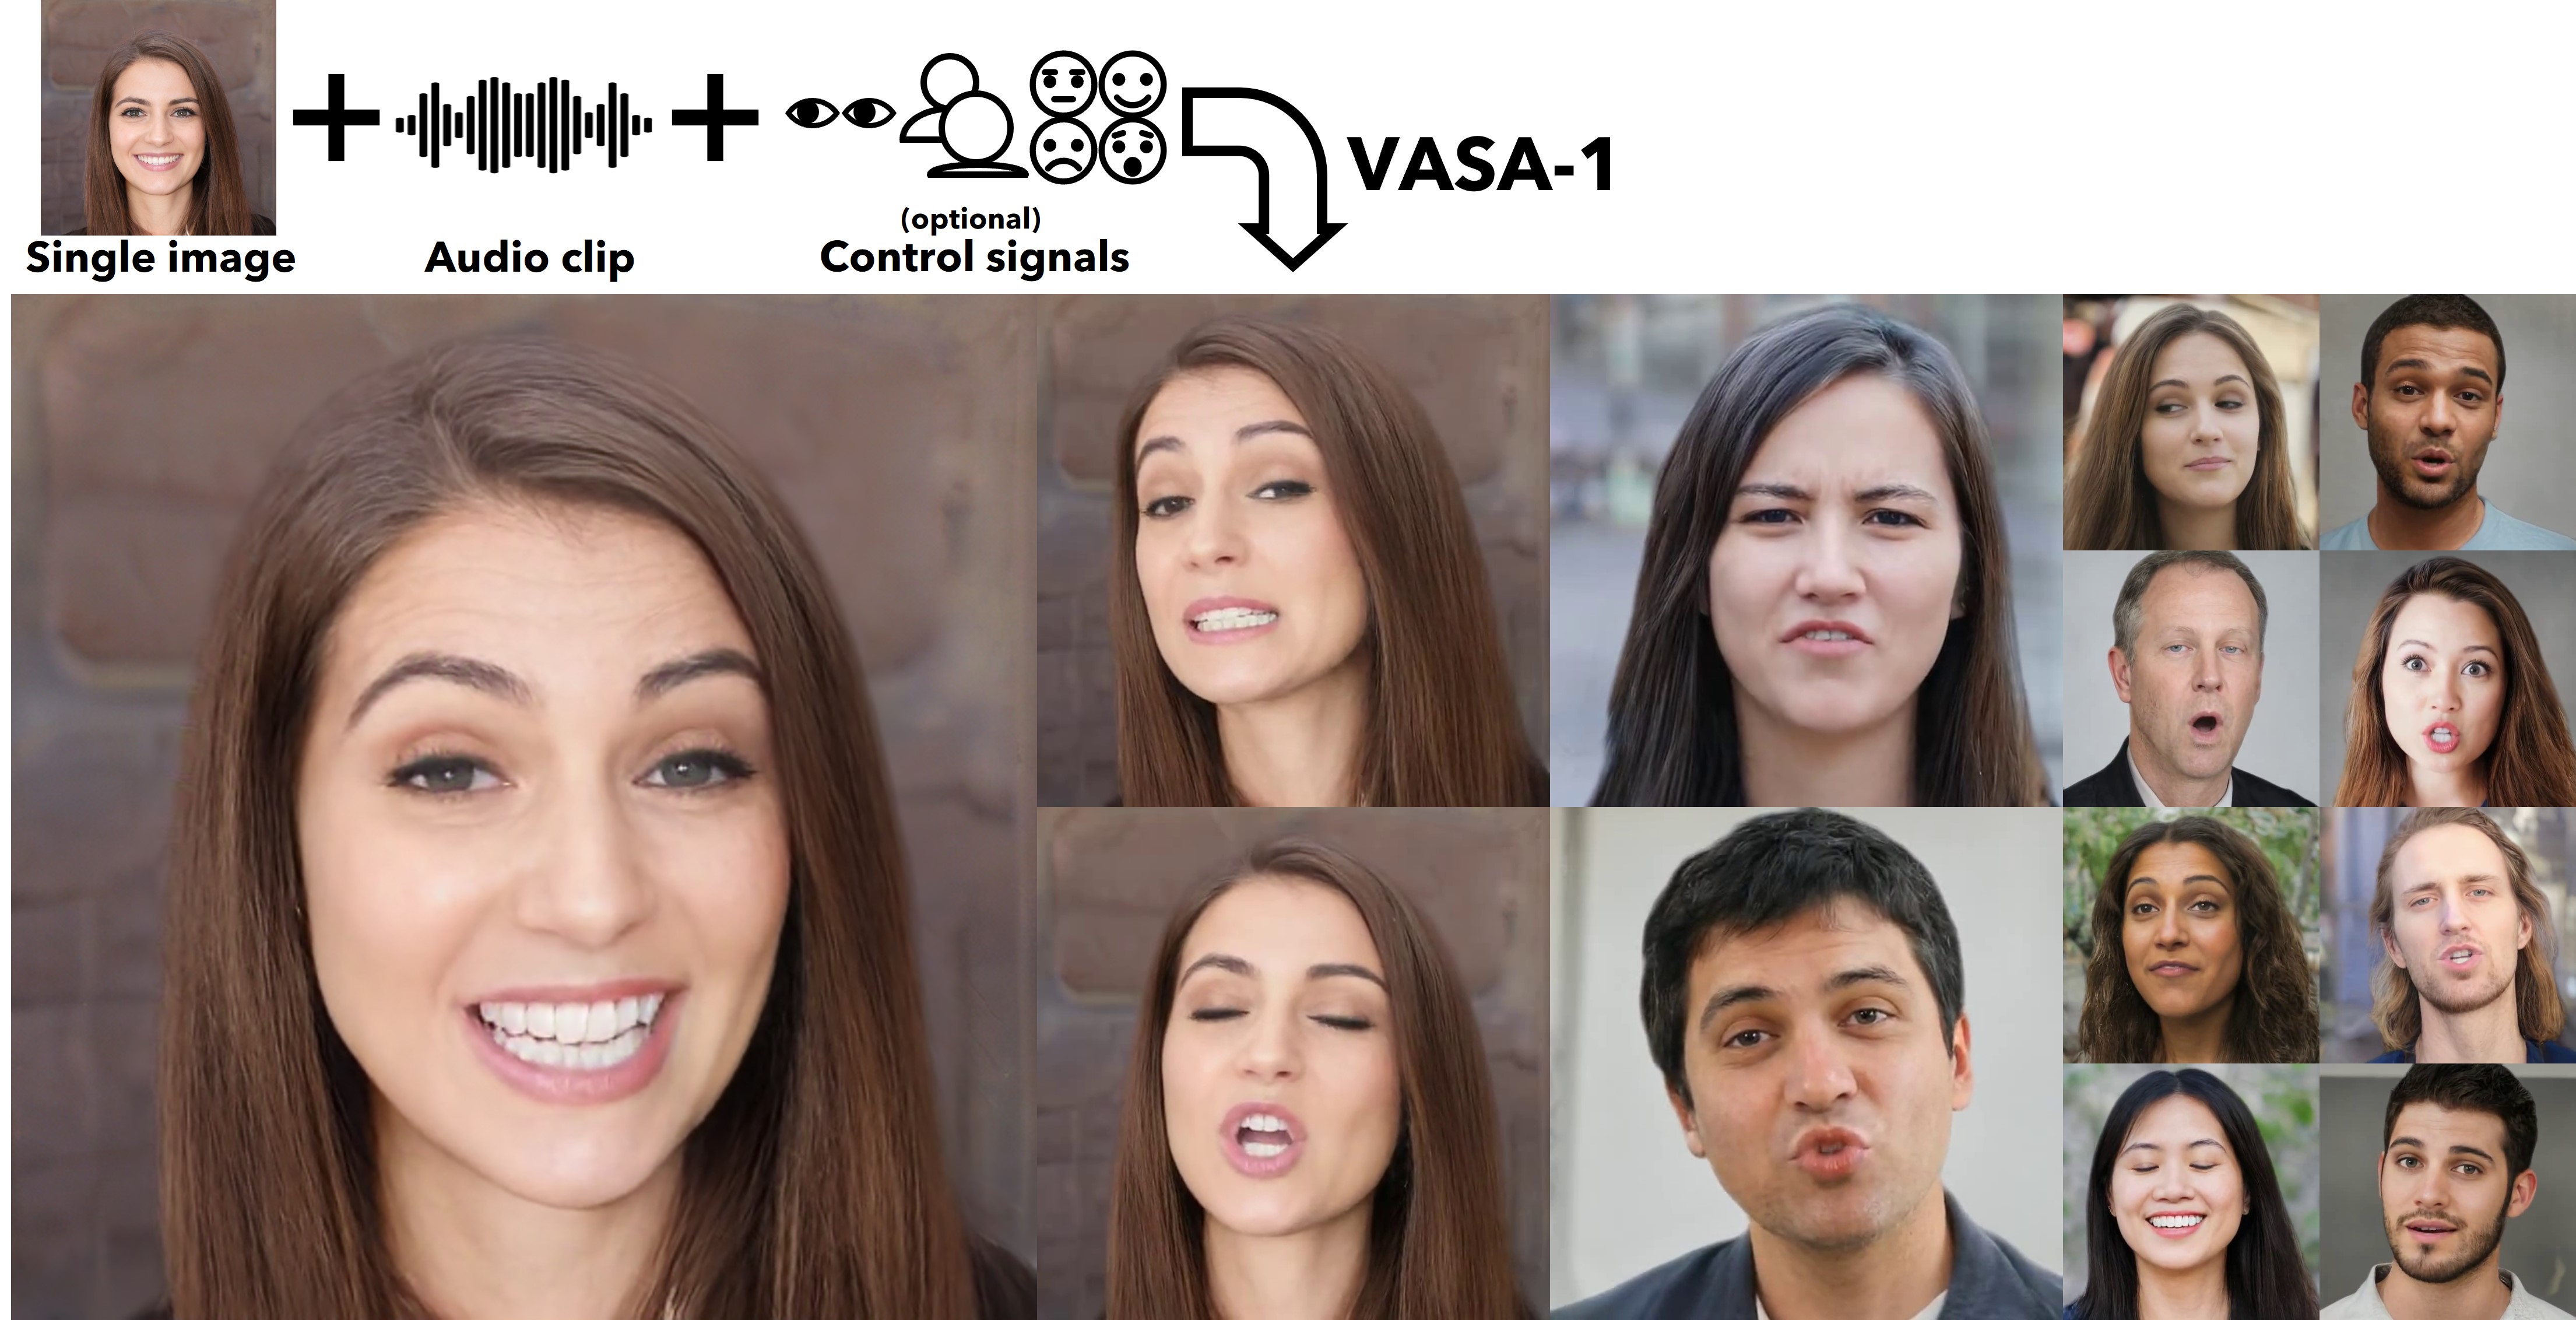 Microsoft's new VASA-1 AI framework generates super-realistic talking heads that can even sing songs - SiliconANGLE